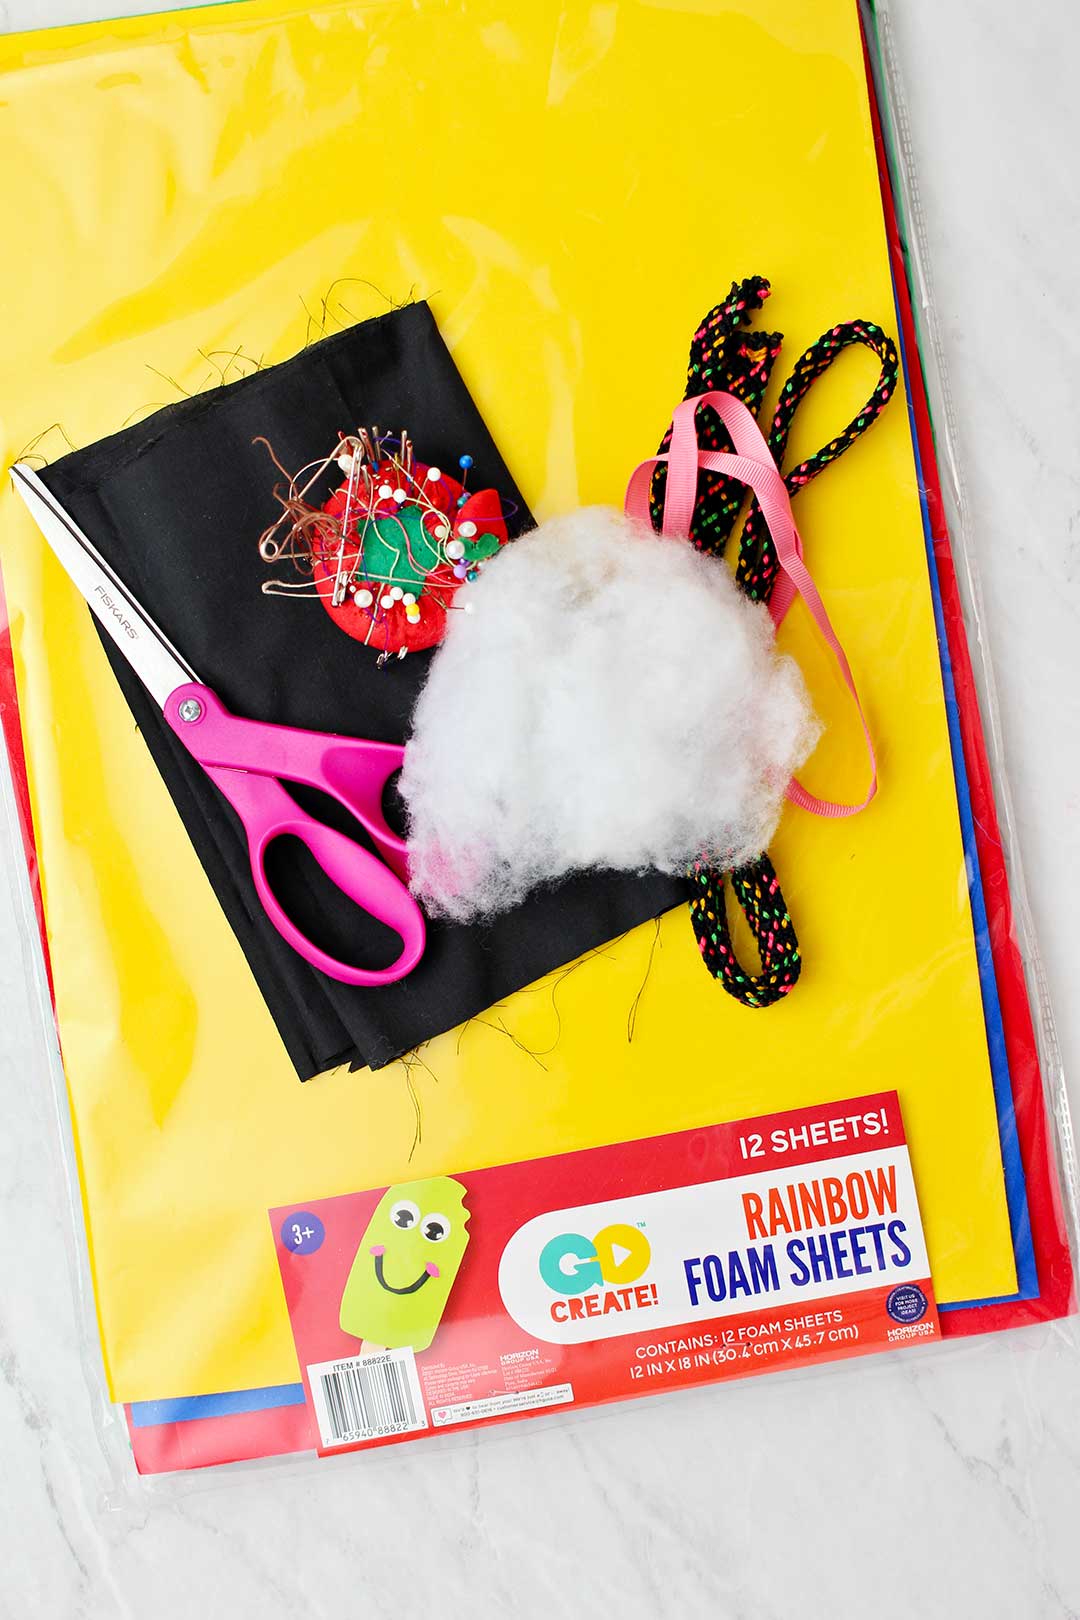 A packet of rainbow foam sheets and other various supplies to make black cat halloween costume.